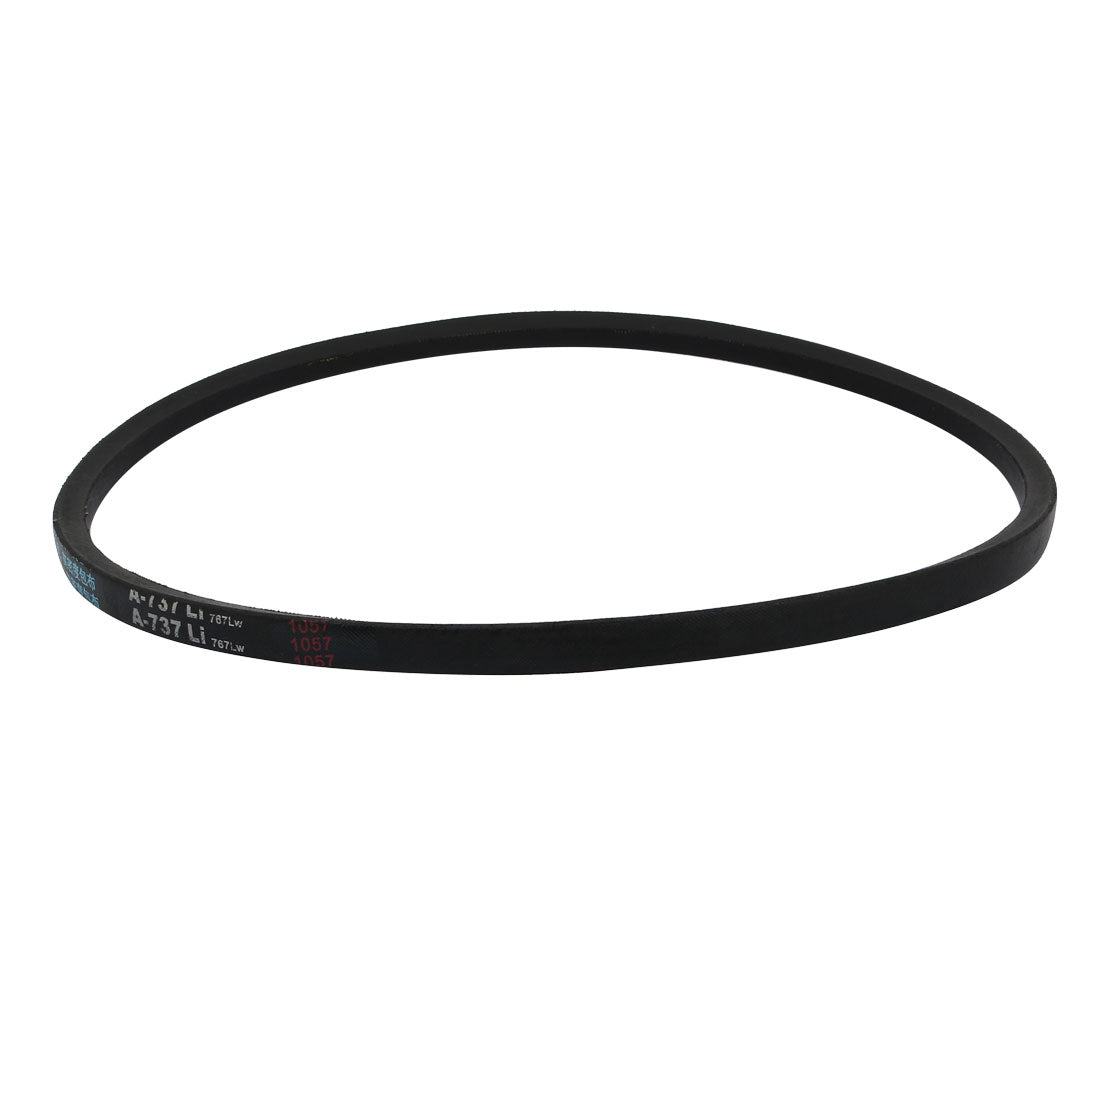 uxcell Uxcell A737 Rubber Transmission Drive Belt V-Belt 8mm Thick 737mm Inner Girth for Washing Machine